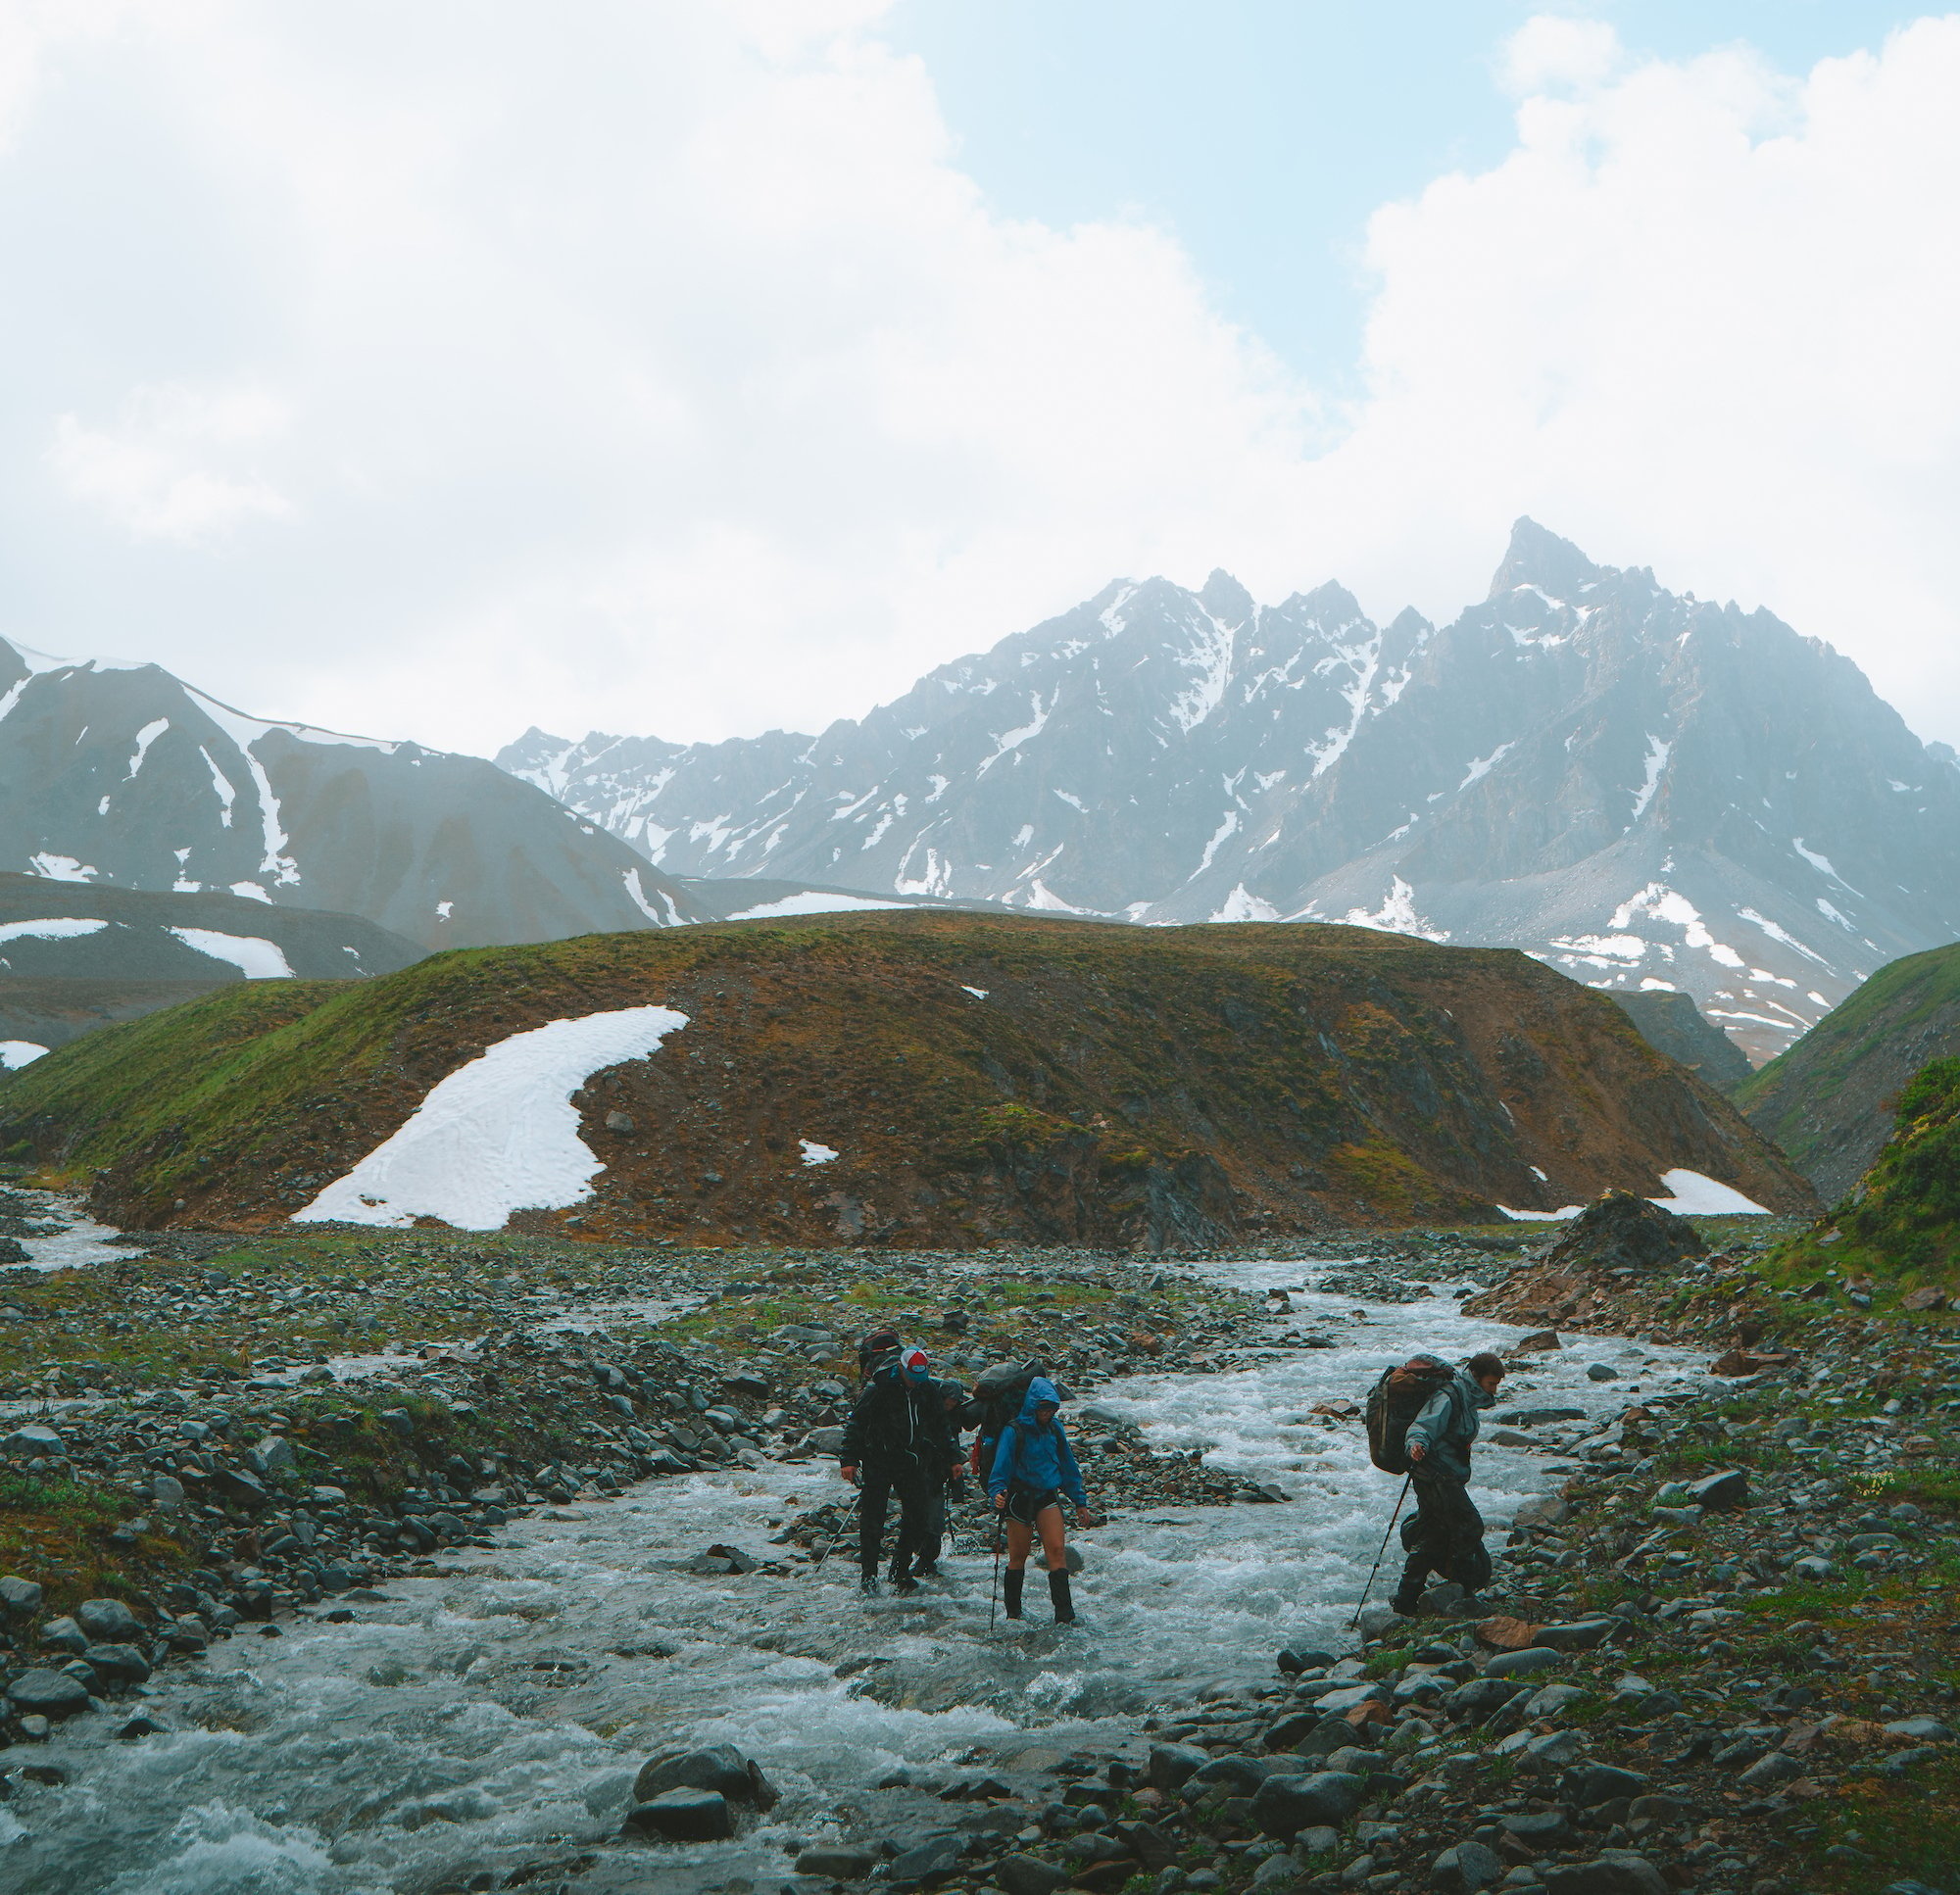 NOLS students cross a stream in mountains with patchy snow